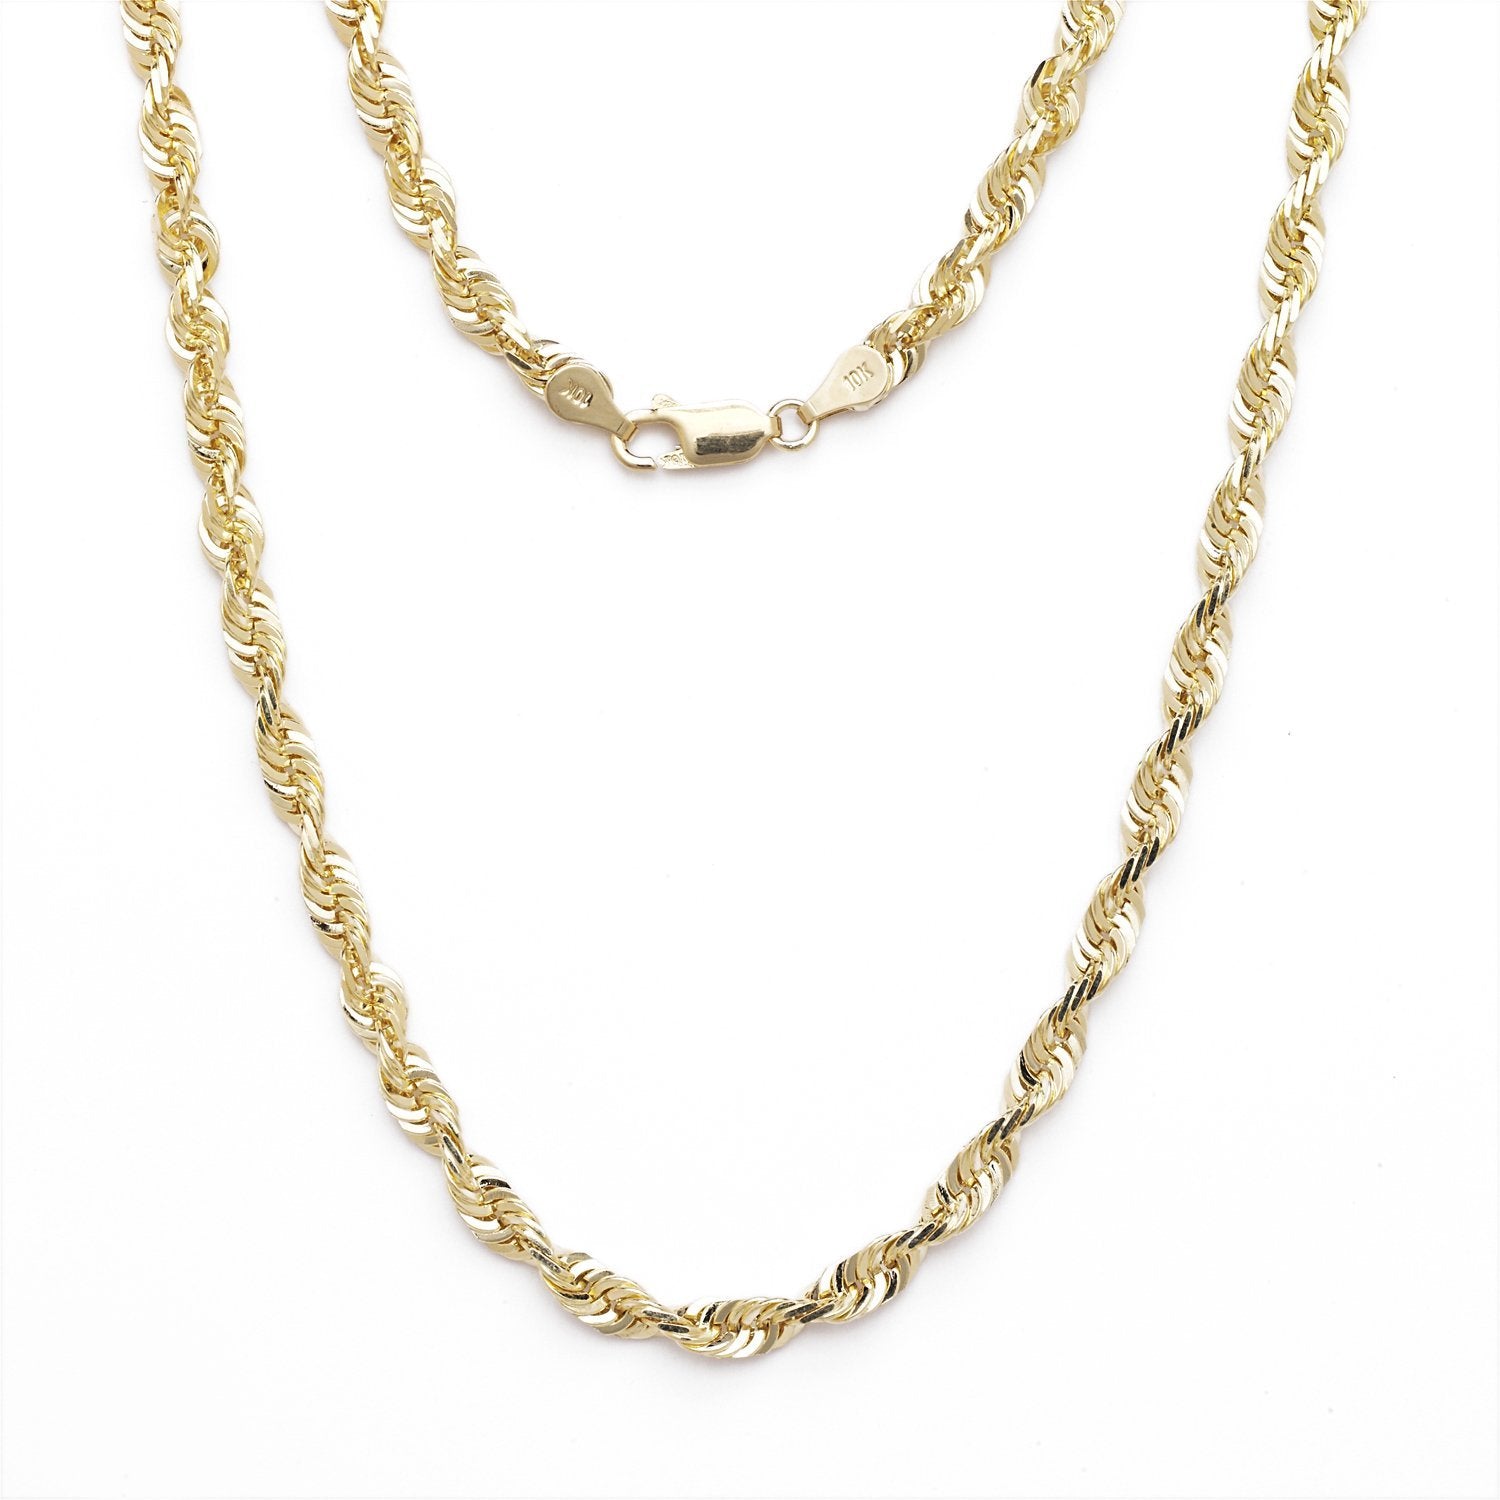 10k Yellow Gold Solid Extra Light Diamond Cut Rope Chain Necklace, 5mm